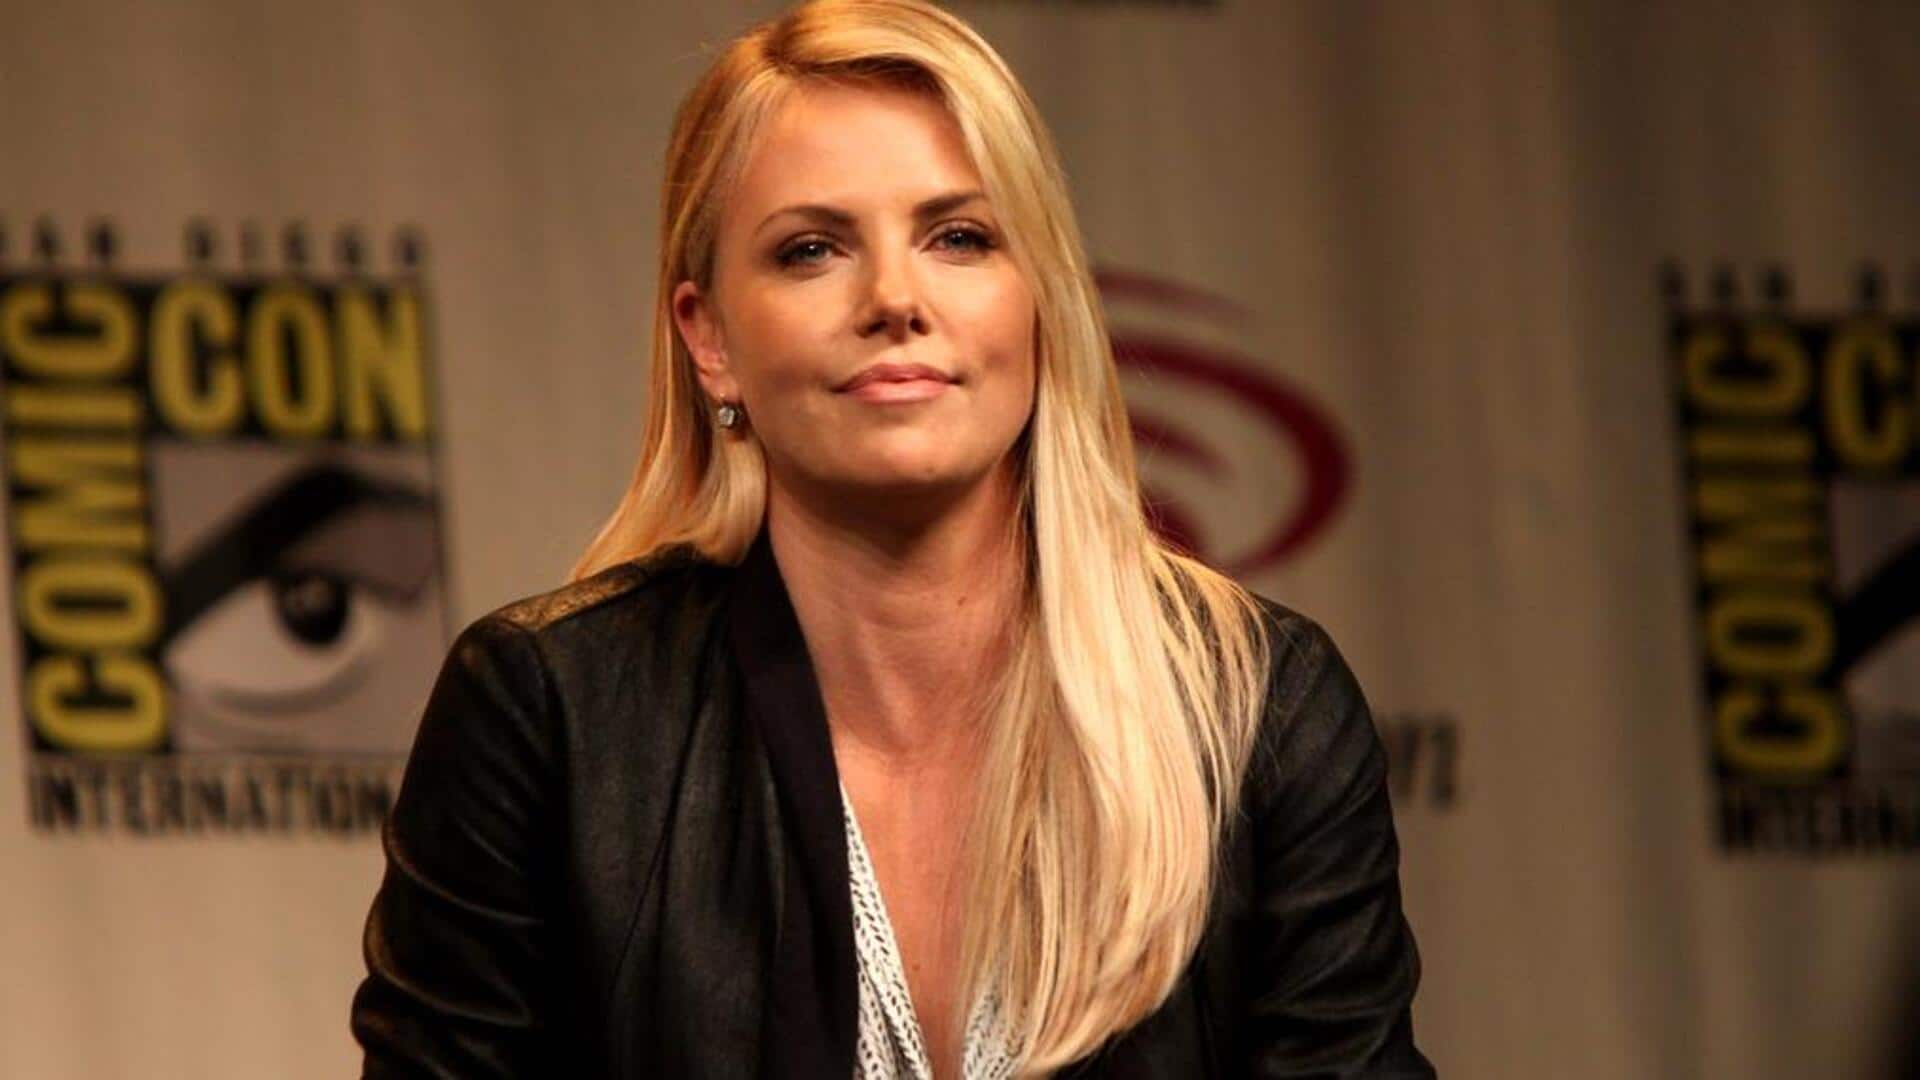 Acknowledging Charlize Theron's top action roles